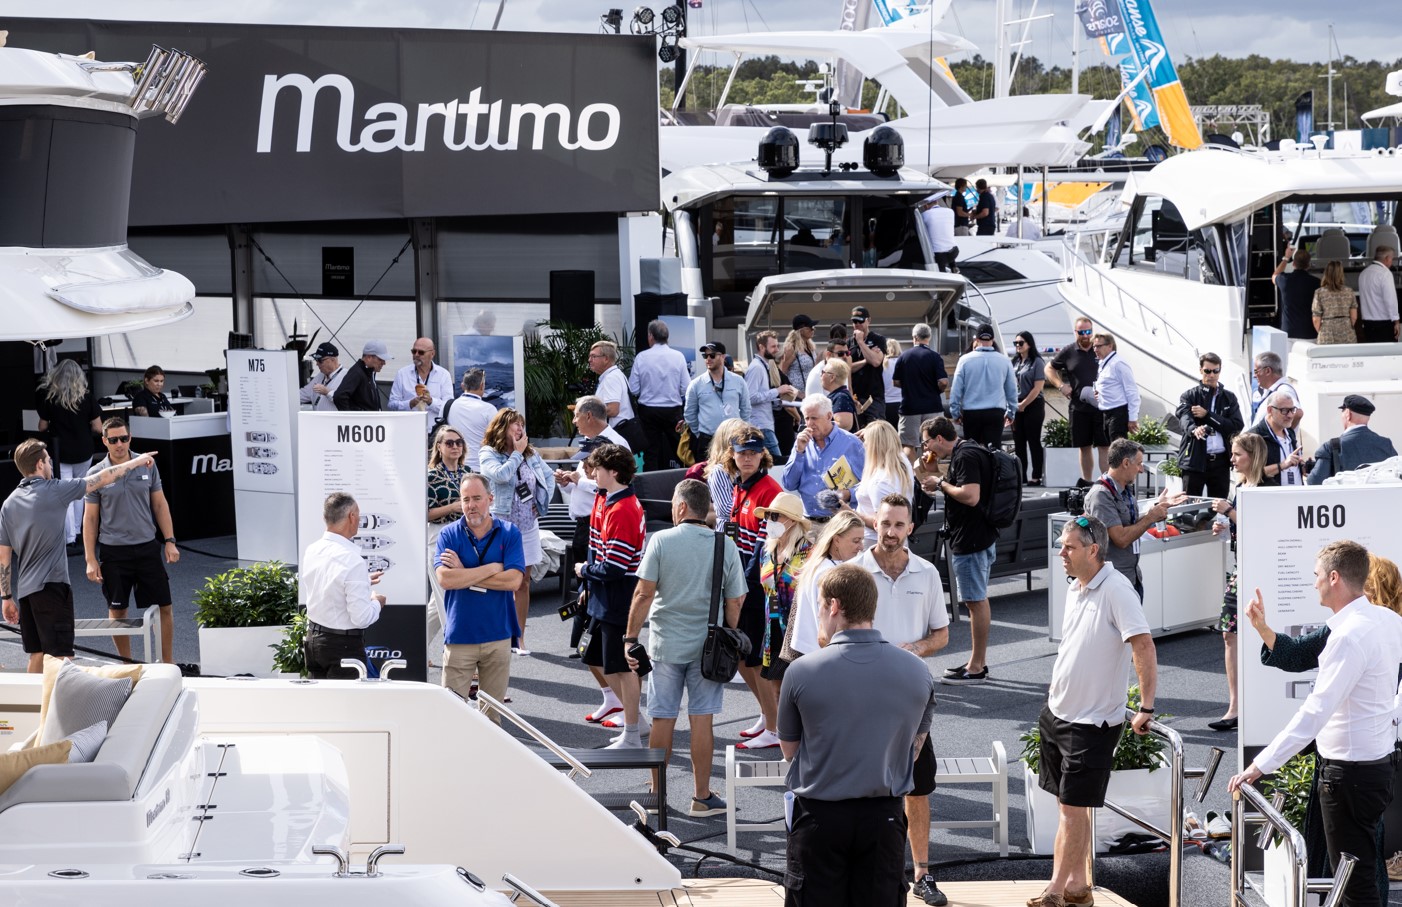 Seas The Day – Sanctuary Cove International Boat Show 2023 tickets and VIP experiences on sale now